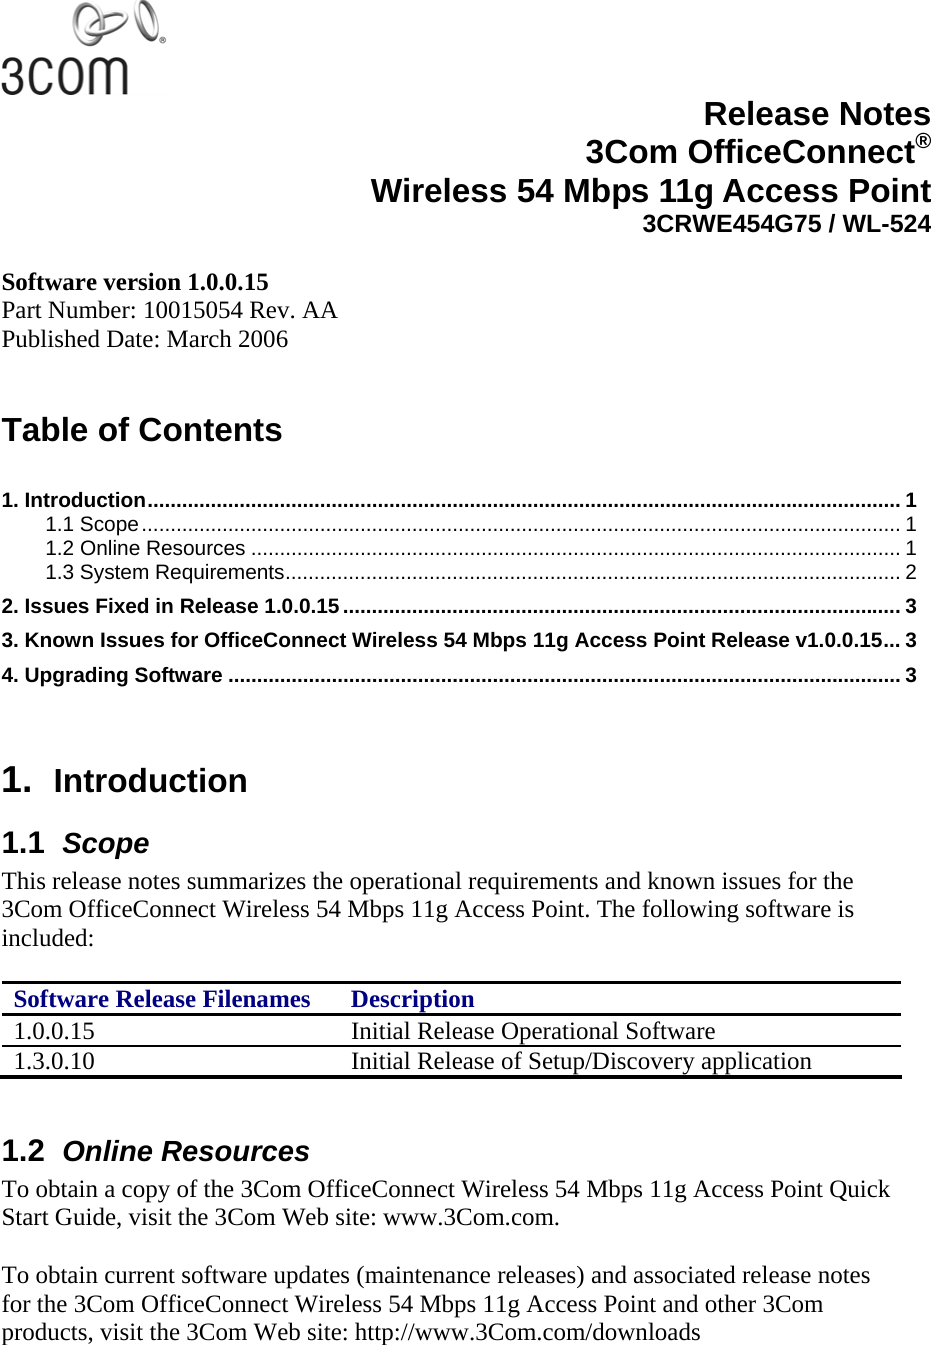   Release Notes3Com OfficeConnect®Wireless 54 Mbps 11g Access Point3CRWE454G75 / WL-524 Software version 1.0.0.15 Part Number: 10015054 Rev. AA Published Date: March 2006   Table of Contents  1. Introduction................................................................................................................................... 1 1.1 Scope.................................................................................................................................... 1 1.2 Online Resources ................................................................................................................. 1 1.3 System Requirements........................................................................................................... 2 2. Issues Fixed in Release 1.0.0.15................................................................................................. 3 3. Known Issues for OfficeConnect Wireless 54 Mbps 11g Access Point Release v1.0.0.15... 3 4. Upgrading Software ..................................................................................................................... 3   1.  Introduction 1.1  Scope This release notes summarizes the operational requirements and known issues for the 3Com OfficeConnect Wireless 54 Mbps 11g Access Point. The following software is included:  Software Release Filenames  Description 1.0.0.15  Initial Release Operational Software 1.3.0.10  Initial Release of Setup/Discovery application  1.2  Online Resources To obtain a copy of the 3Com OfficeConnect Wireless 54 Mbps 11g Access Point Quick Start Guide, visit the 3Com Web site: www.3Com.com.  To obtain current software updates (maintenance releases) and associated release notes for the 3Com OfficeConnect Wireless 54 Mbps 11g Access Point and other 3Com products, visit the 3Com Web site: http://www.3Com.com/downloads 